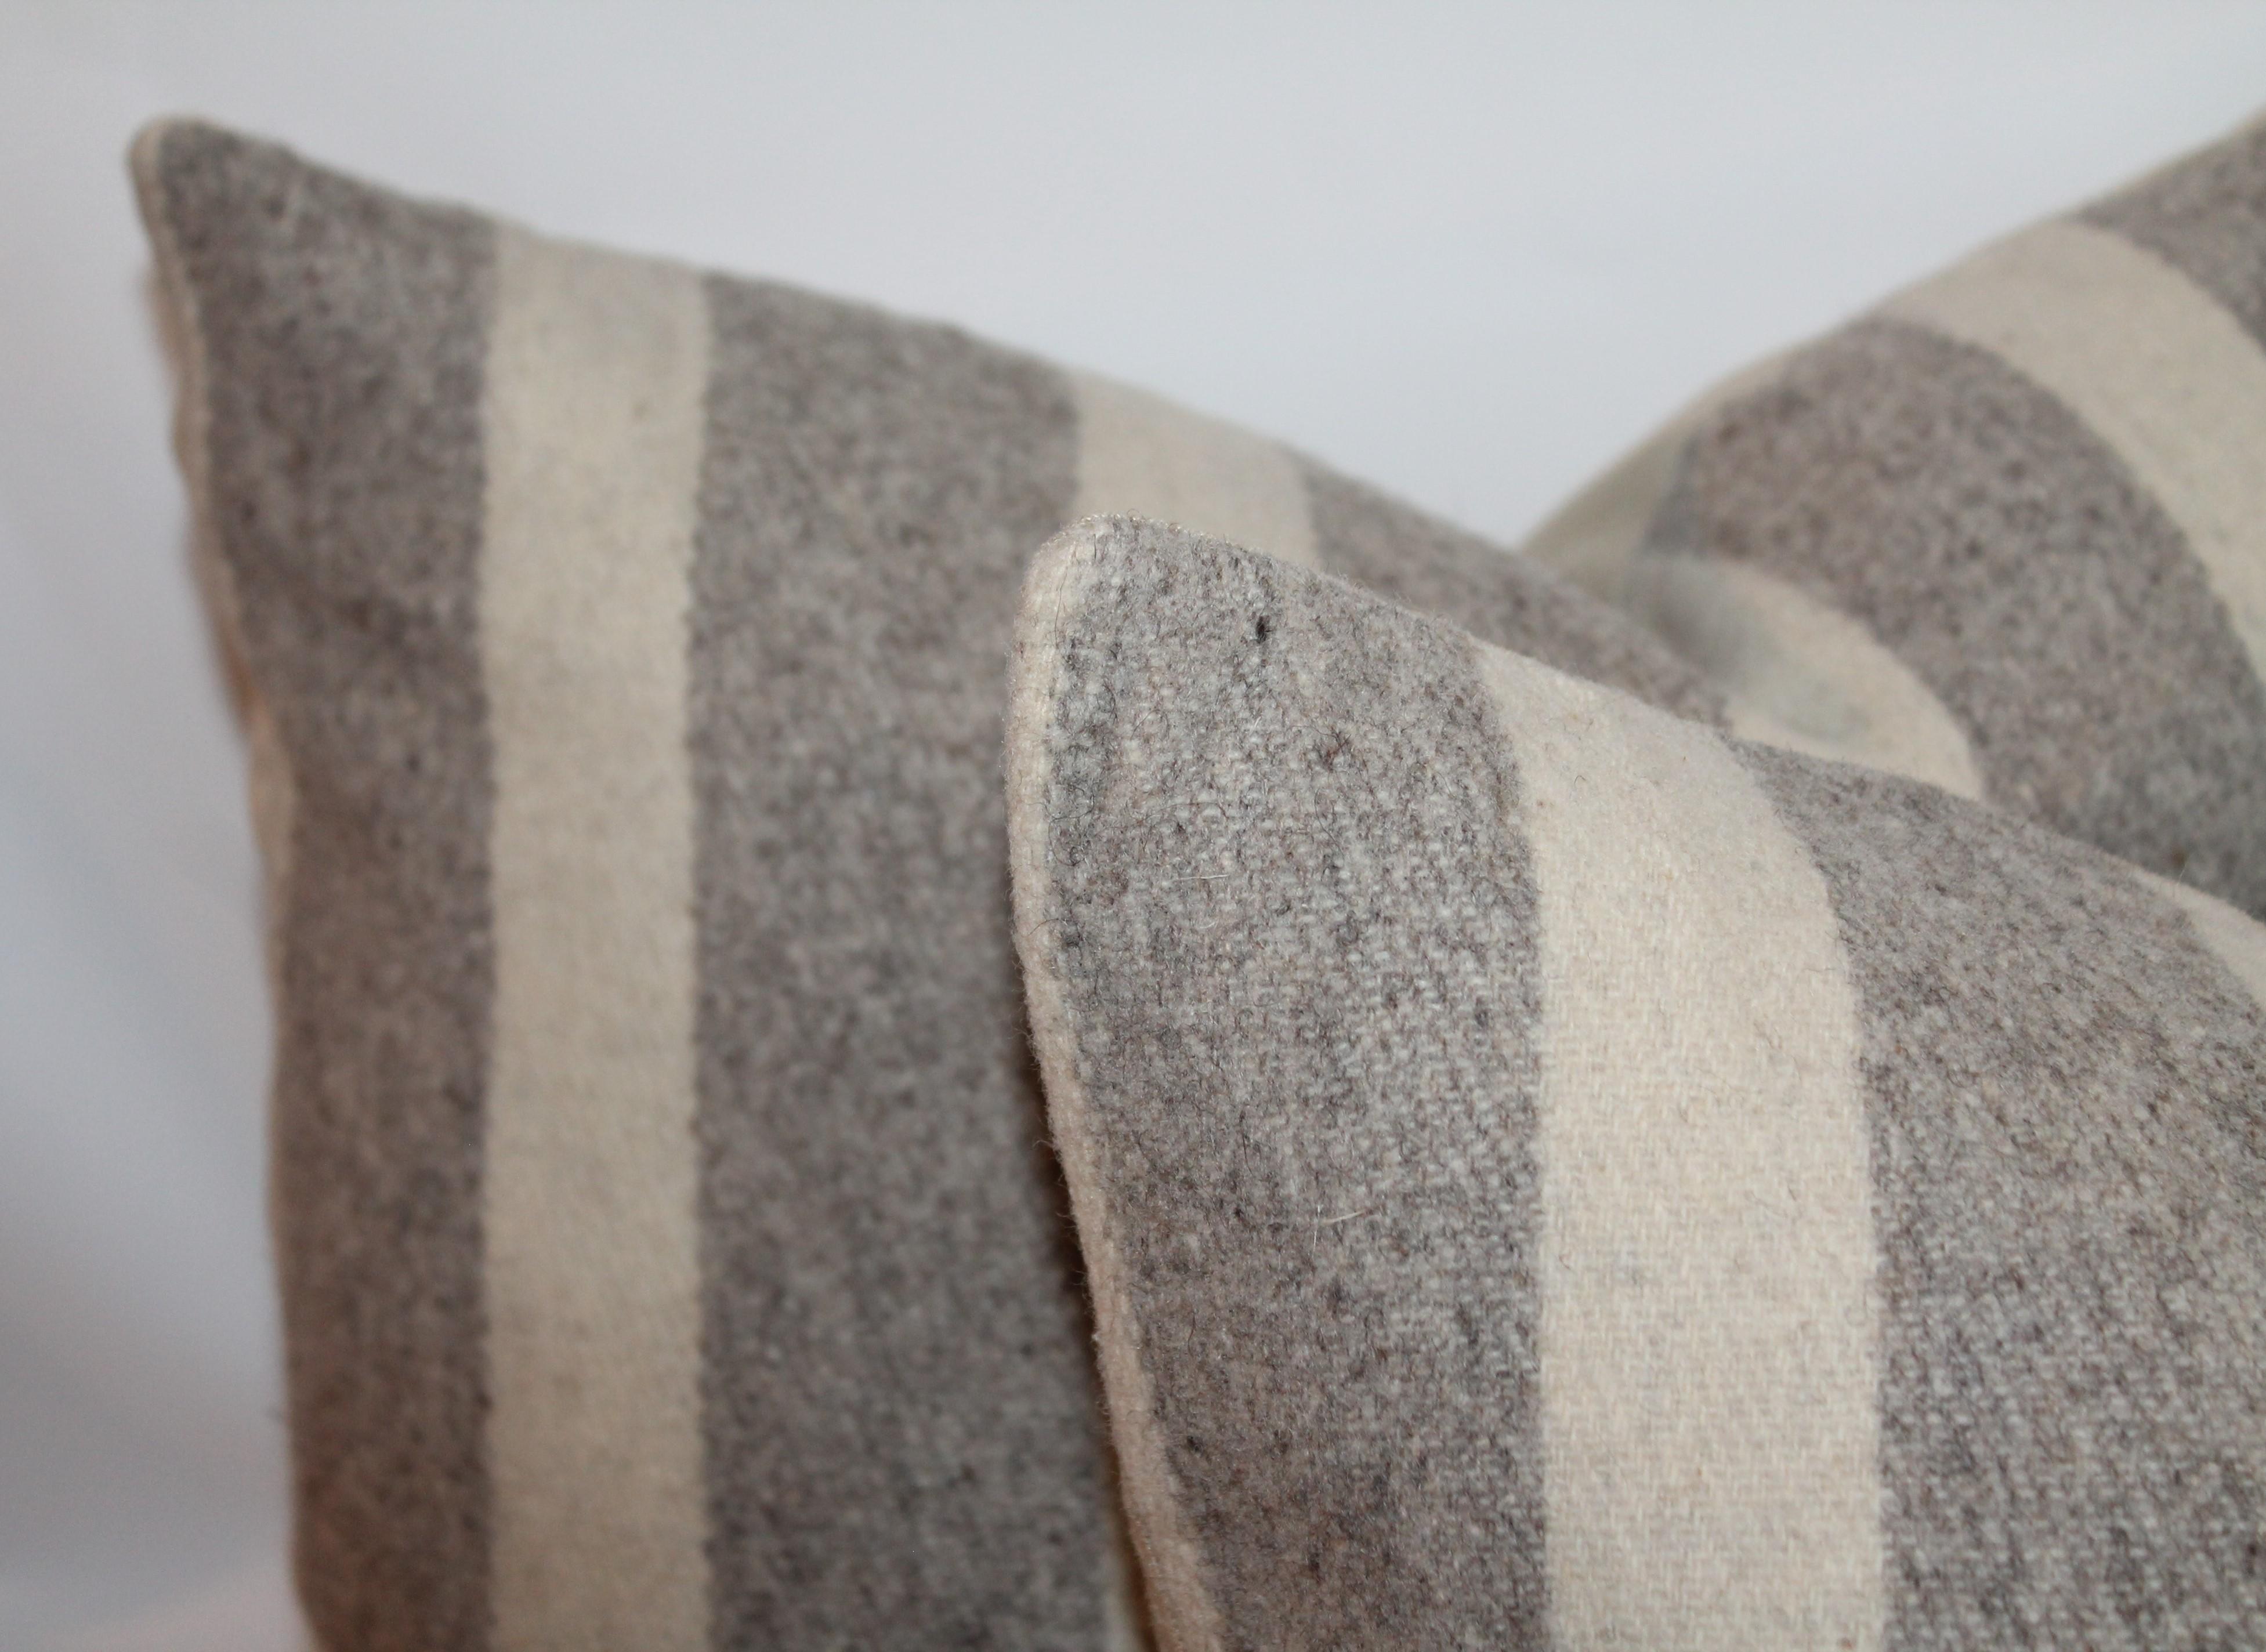 Handwoven Mexican Indian weaving pillows in pristine condition with grey cotton linen backing. The pillows are in cream and grey striped wool. The inserts are in down and feather filled.